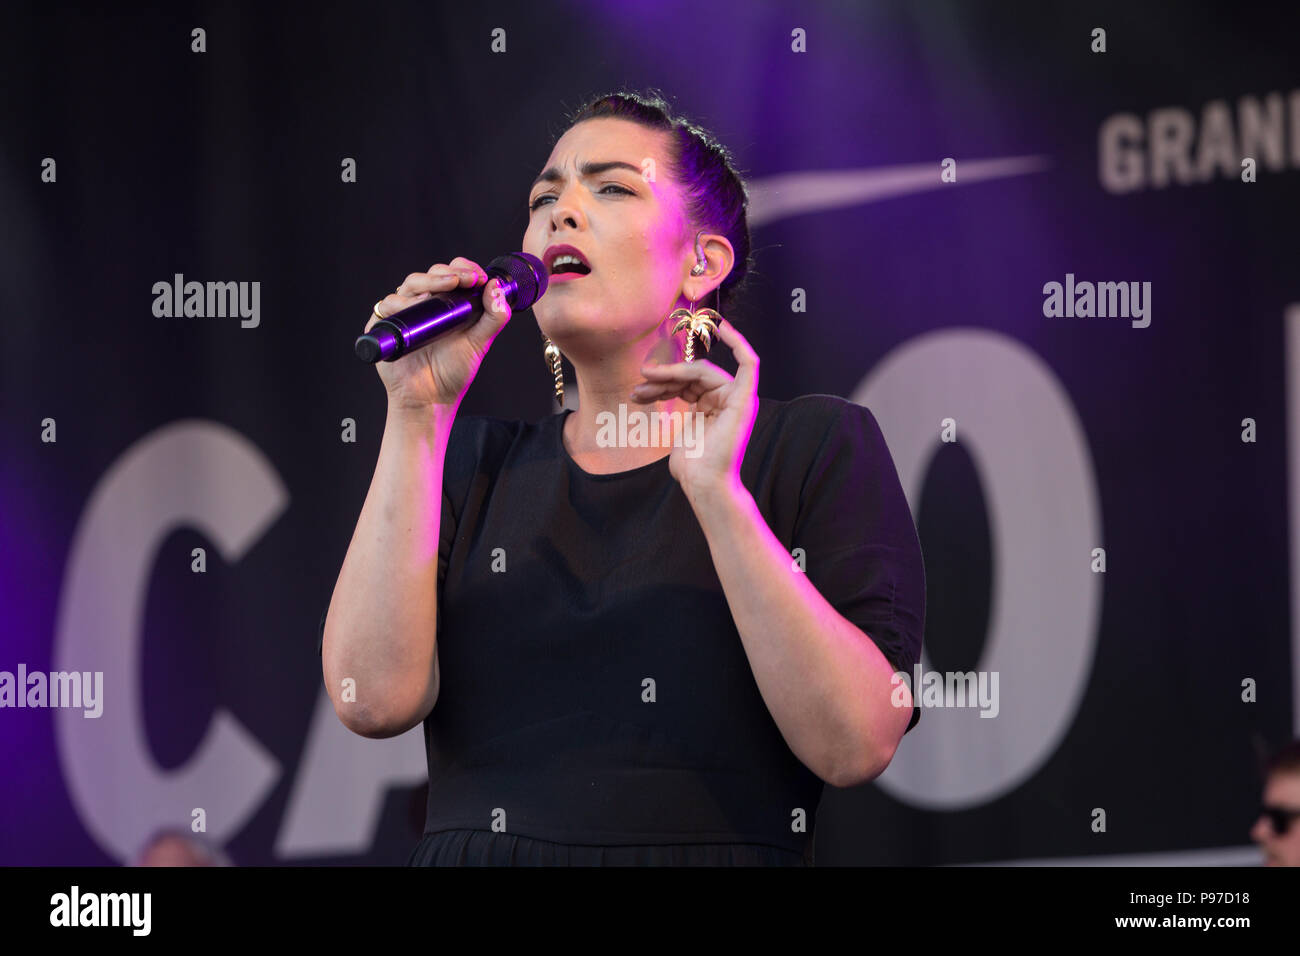 Caro Emerald performs at the 2018 Cornbury Festival, Great Tew, Oxfordshire, UK. 15th July 2018. Caroline Esmeralda van der Leeuw (born 26 April 1981) is a Dutch pop and jazz singer. She debuted under the stage name "Caro Emerald" in July 2009 with "Back It Up". Follow-up single "A Night Like This" reached #1 in the Netherlands. Emerald is often praised for her outstanding live performances. She predominantly performs in English mixed in with her own made up words in the form of scat singing as demonstrated in her hit "Back It Up". Credit: John Lambeth/Alamy Live News Stock Photo